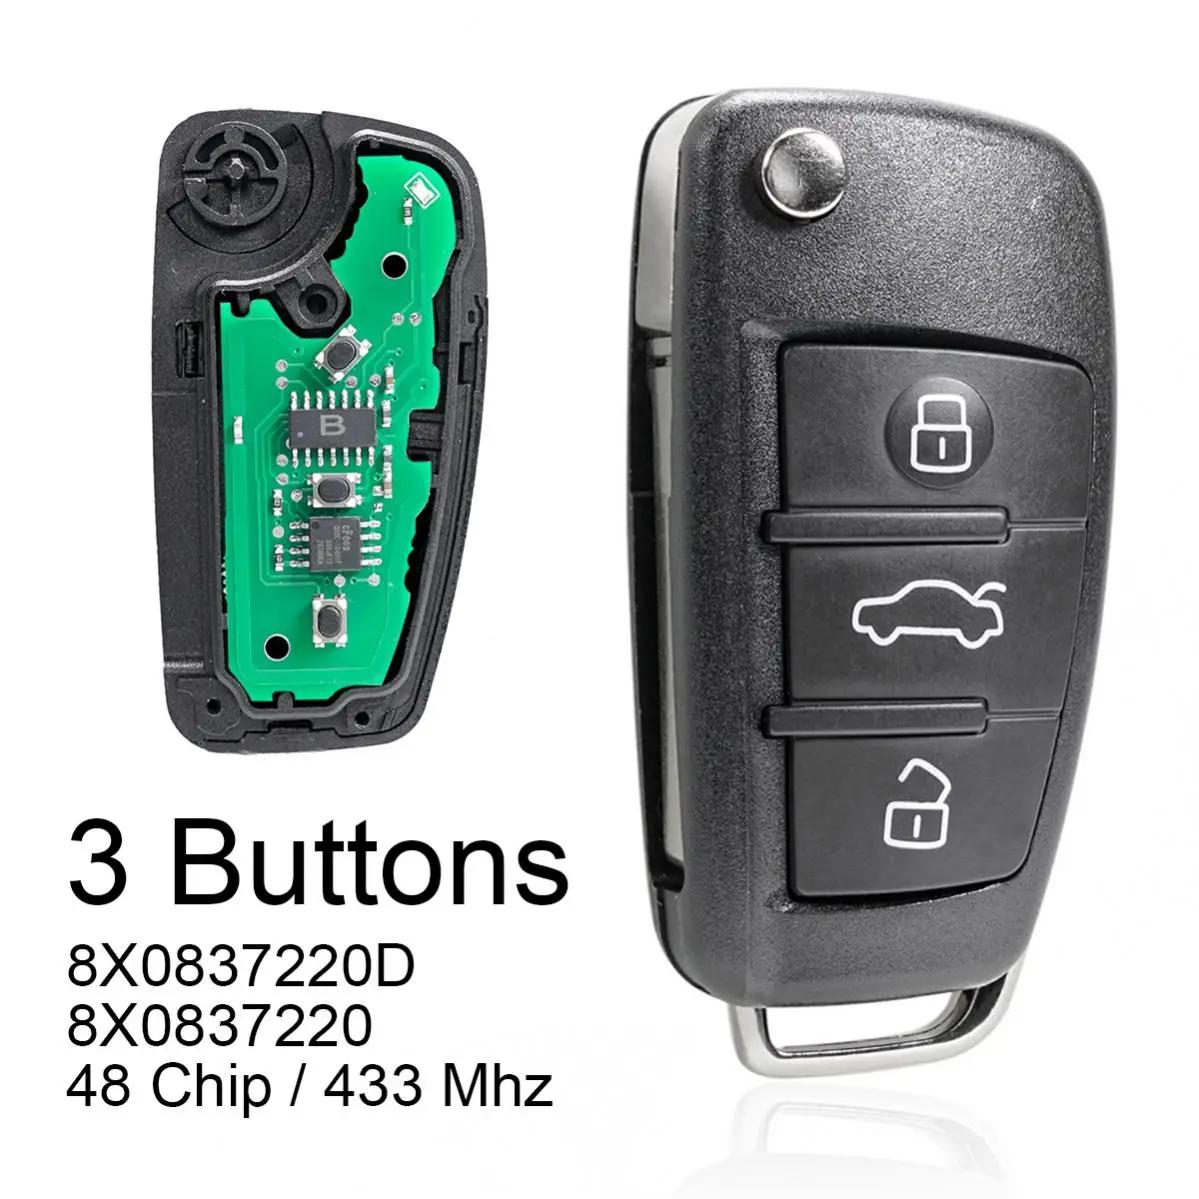 433Mhz 3 Buttons Car Remote Key with ID48 Chip /8X0837220D 8X0837220 for Audi- A1 Q3 S1 2010 2011 2012 2013 2014 2015 2016 2017 433mhz 3 buttons keyless uncut flip car key remote key fob with id48 chip 4d0837231k fit for audi a6 tt old models